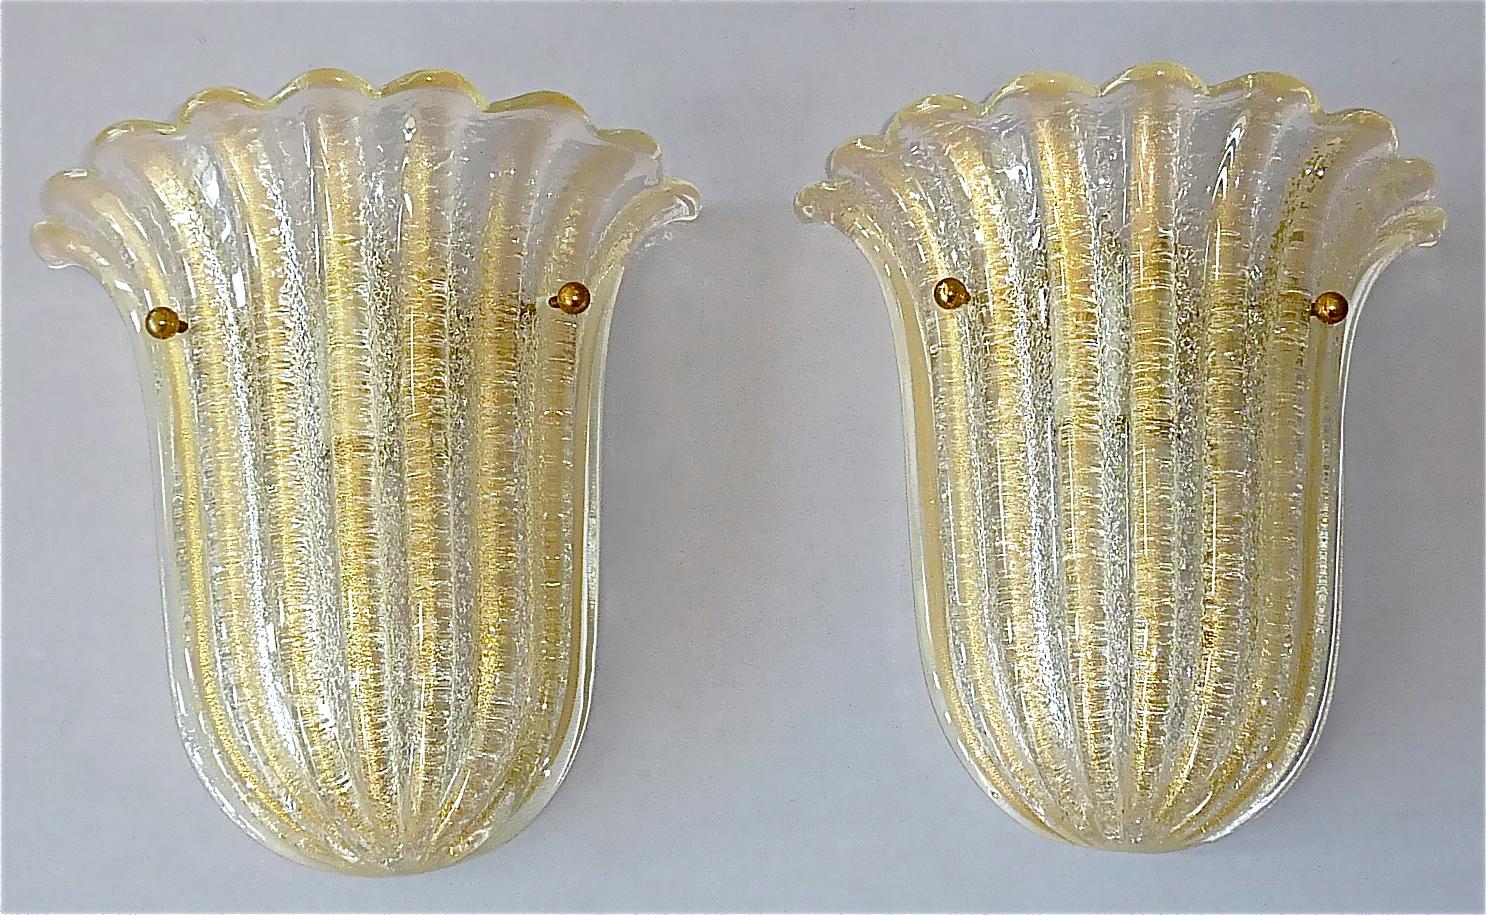 Fabulous pair of signed Barovier & Toso organic tulip leaf sconces or wall lights Murano, Italy circa 1970s. The hand-crafted classical art glass wall lamps have a beautiful tulip shape and they are made in 